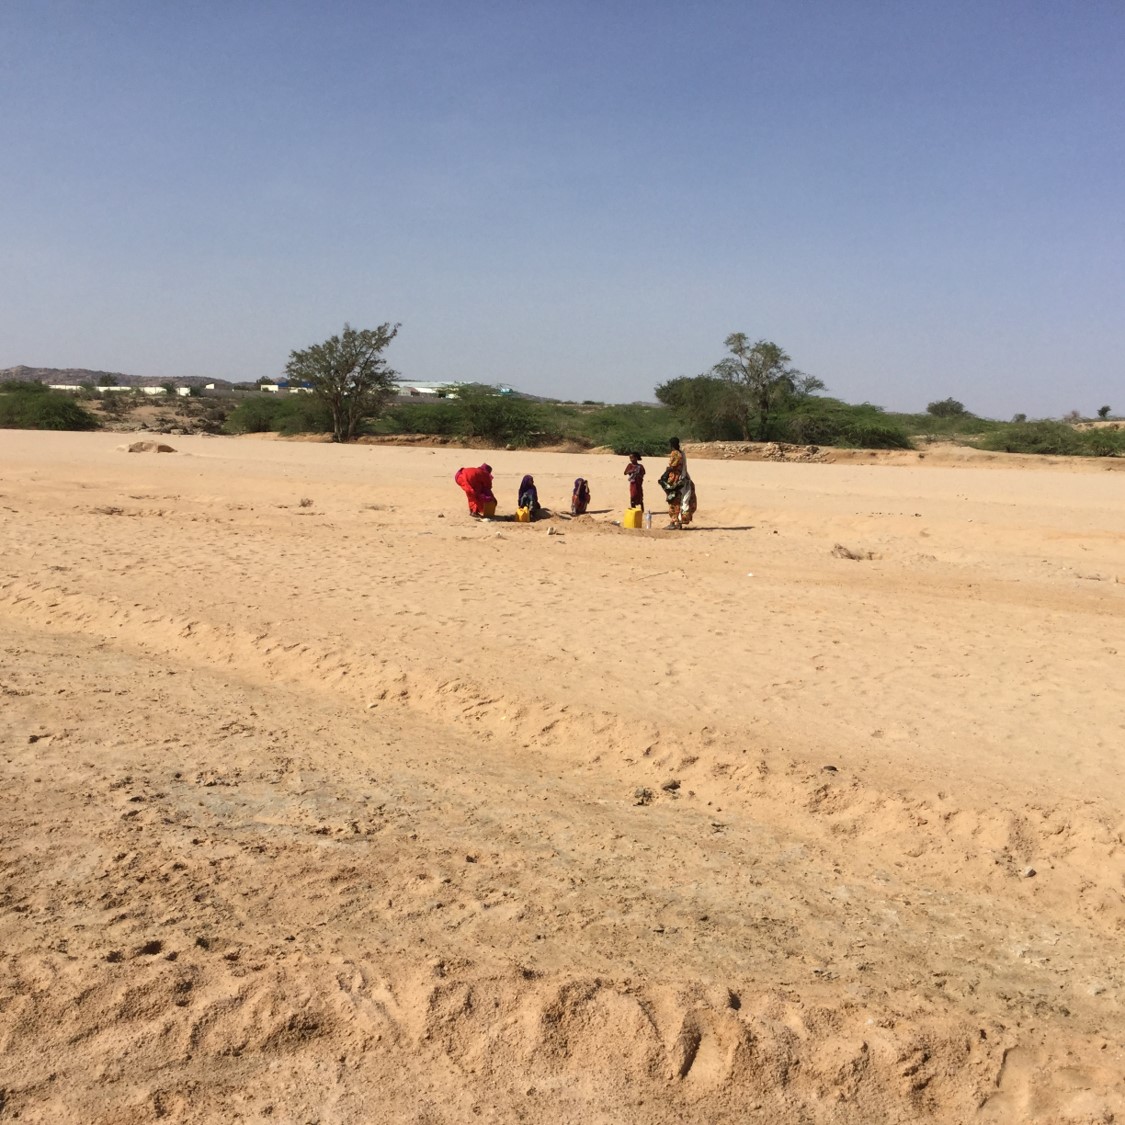 Women in a dried up river bed, Somaliland. Photo by Malou Schueller